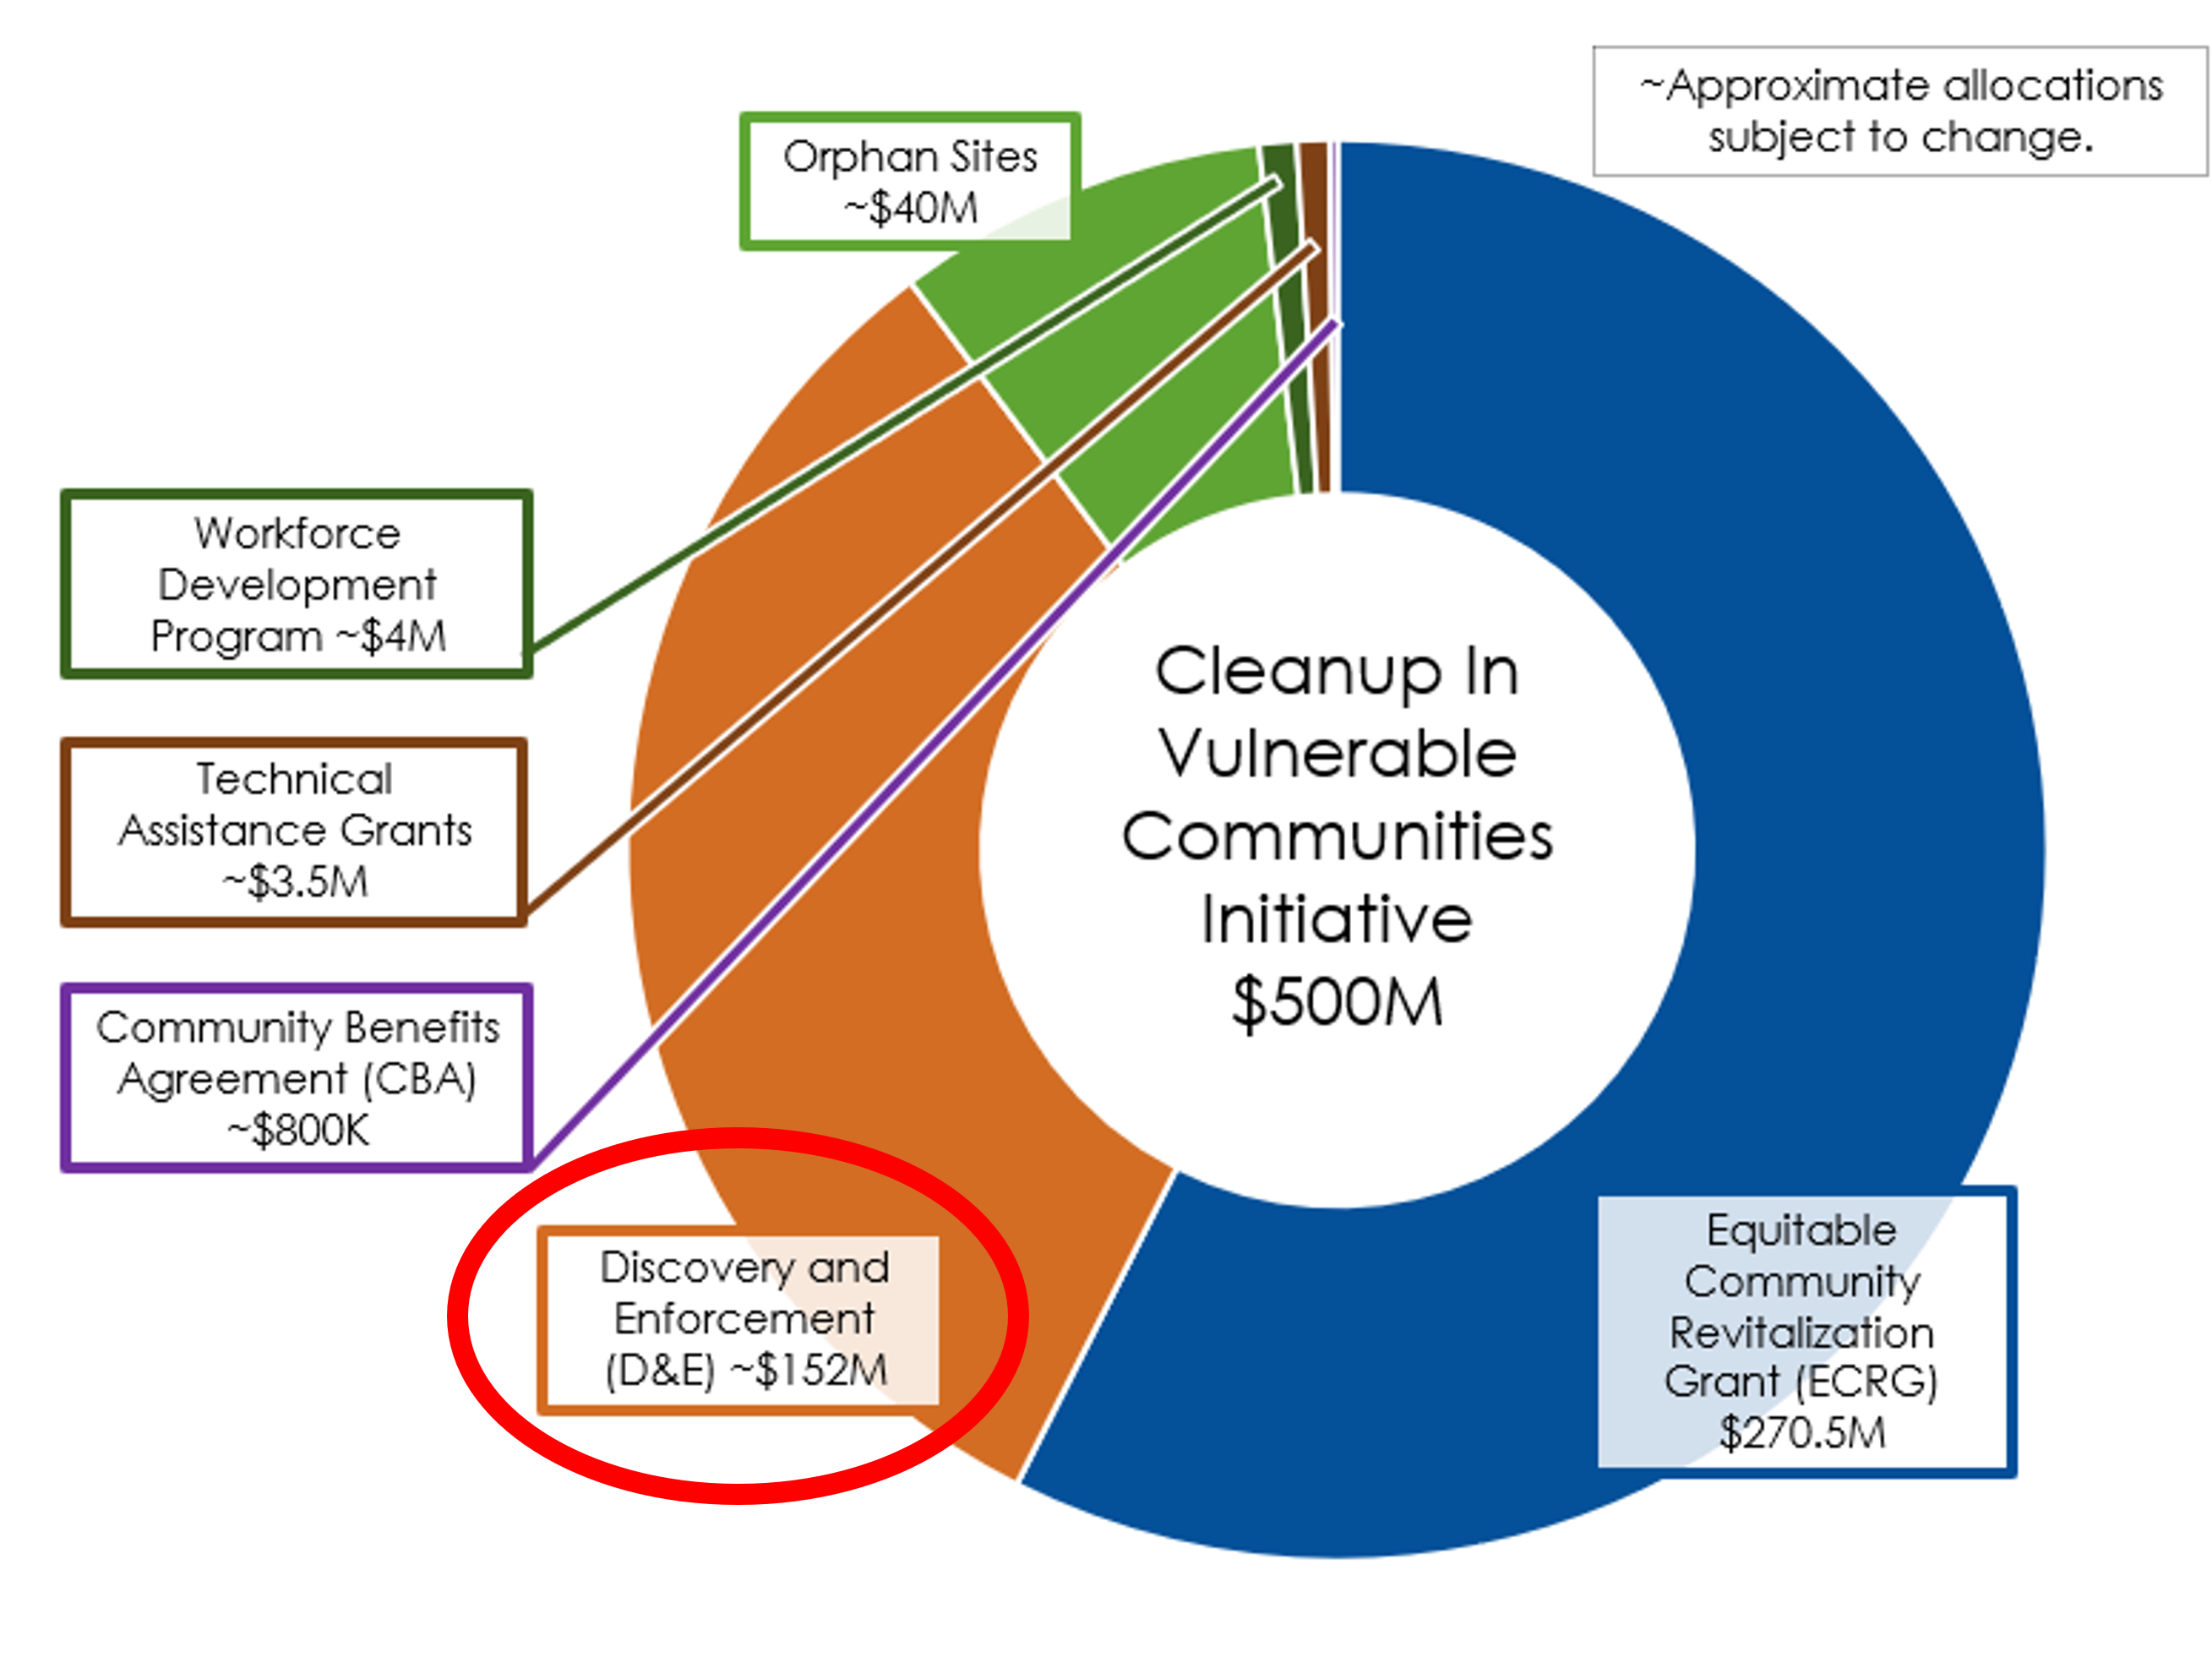 Distribution of funding for Cleanup in Vulnerable Communities Initiative